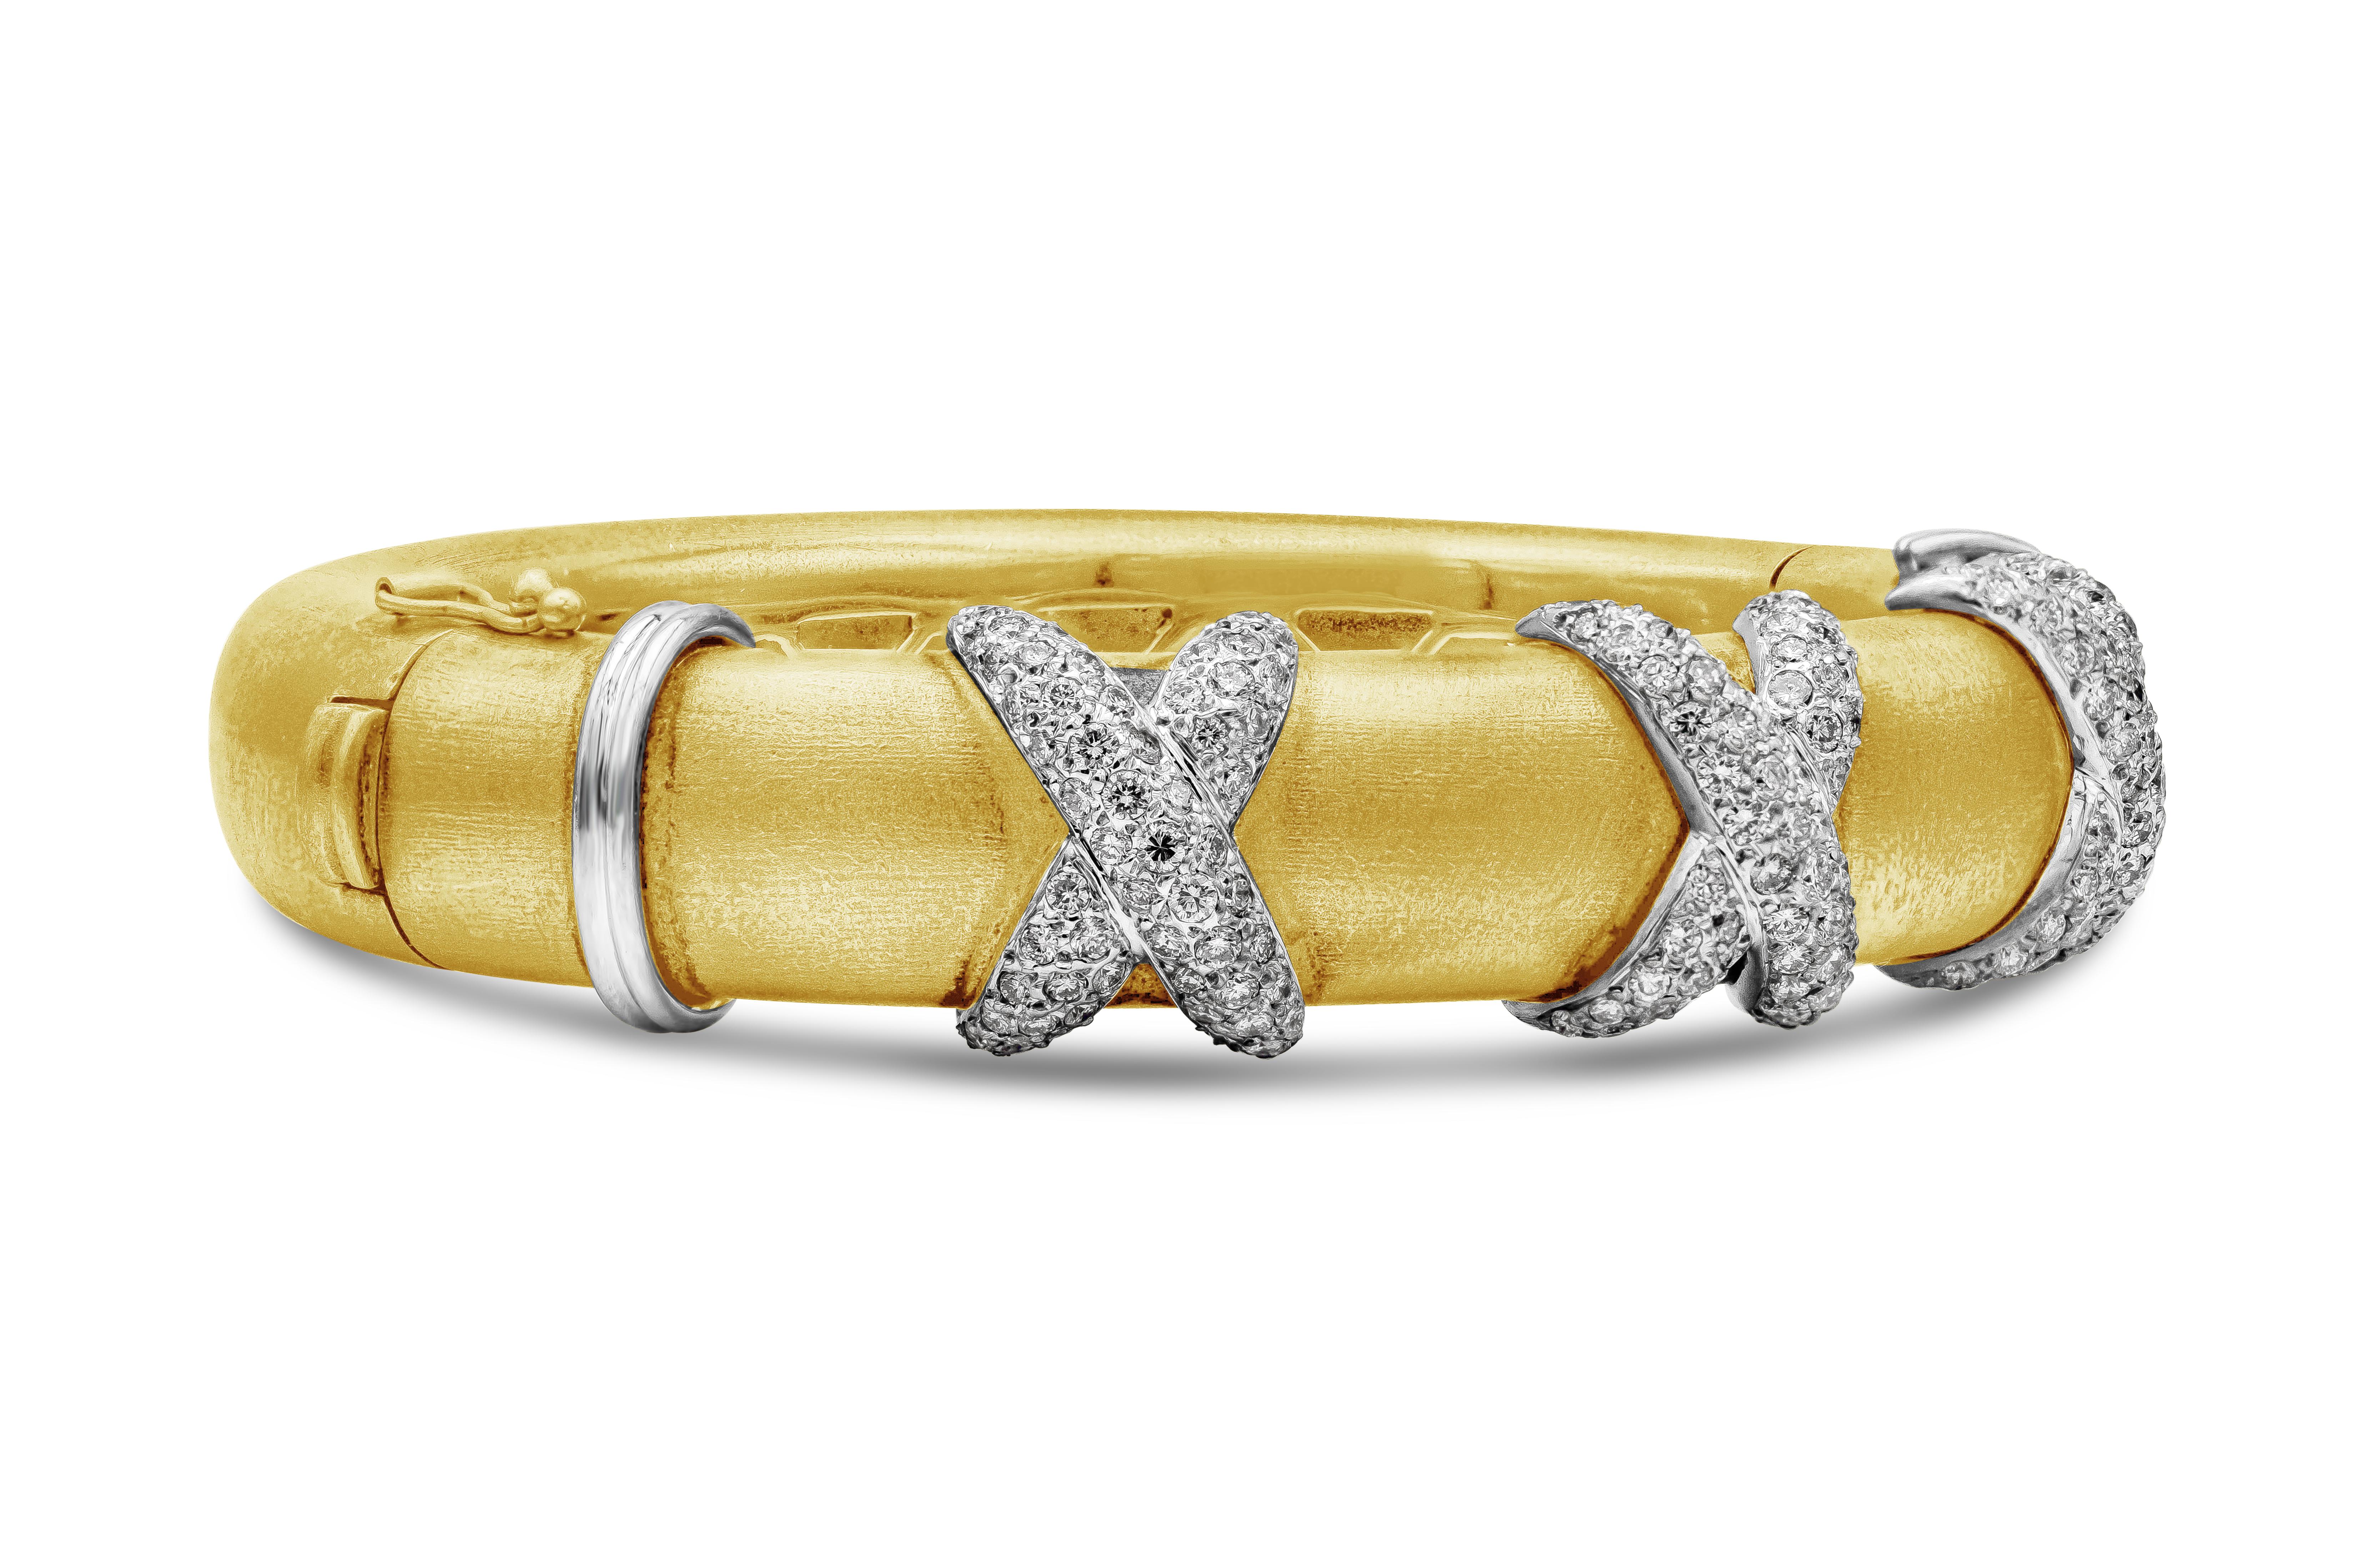 Triple Cross Diamond Thick Bangle Bracelet in White Gold & Yellow Gold In New Condition For Sale In New York, NY